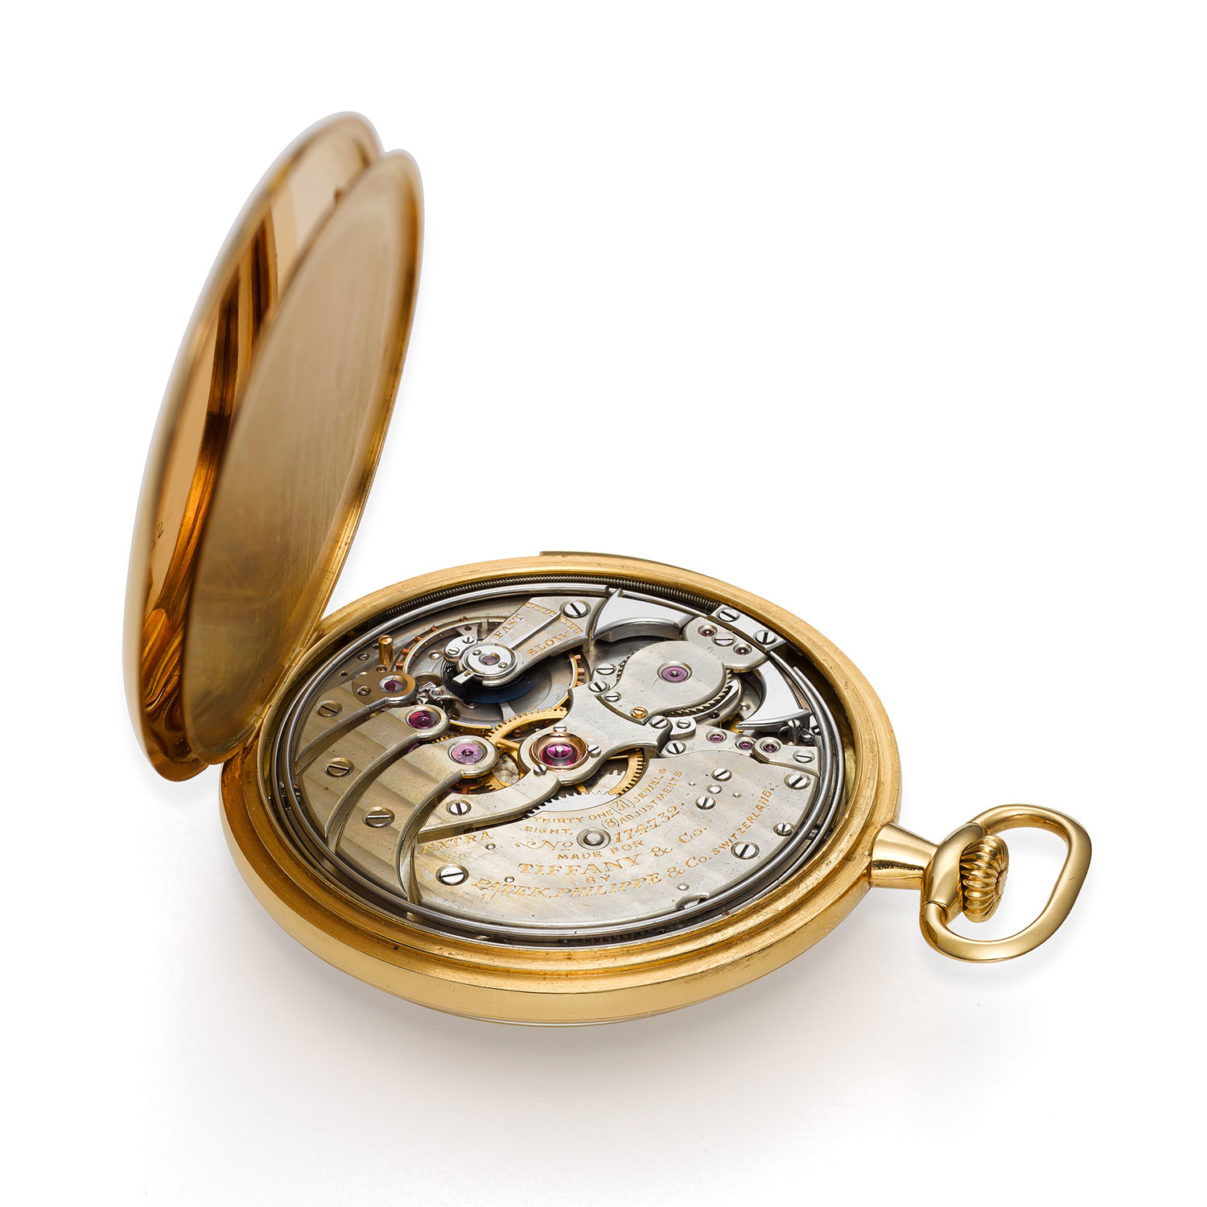 PATEK PHILIPPE FIVE MINUTE REPEATING POCKET WATCH - Collectability